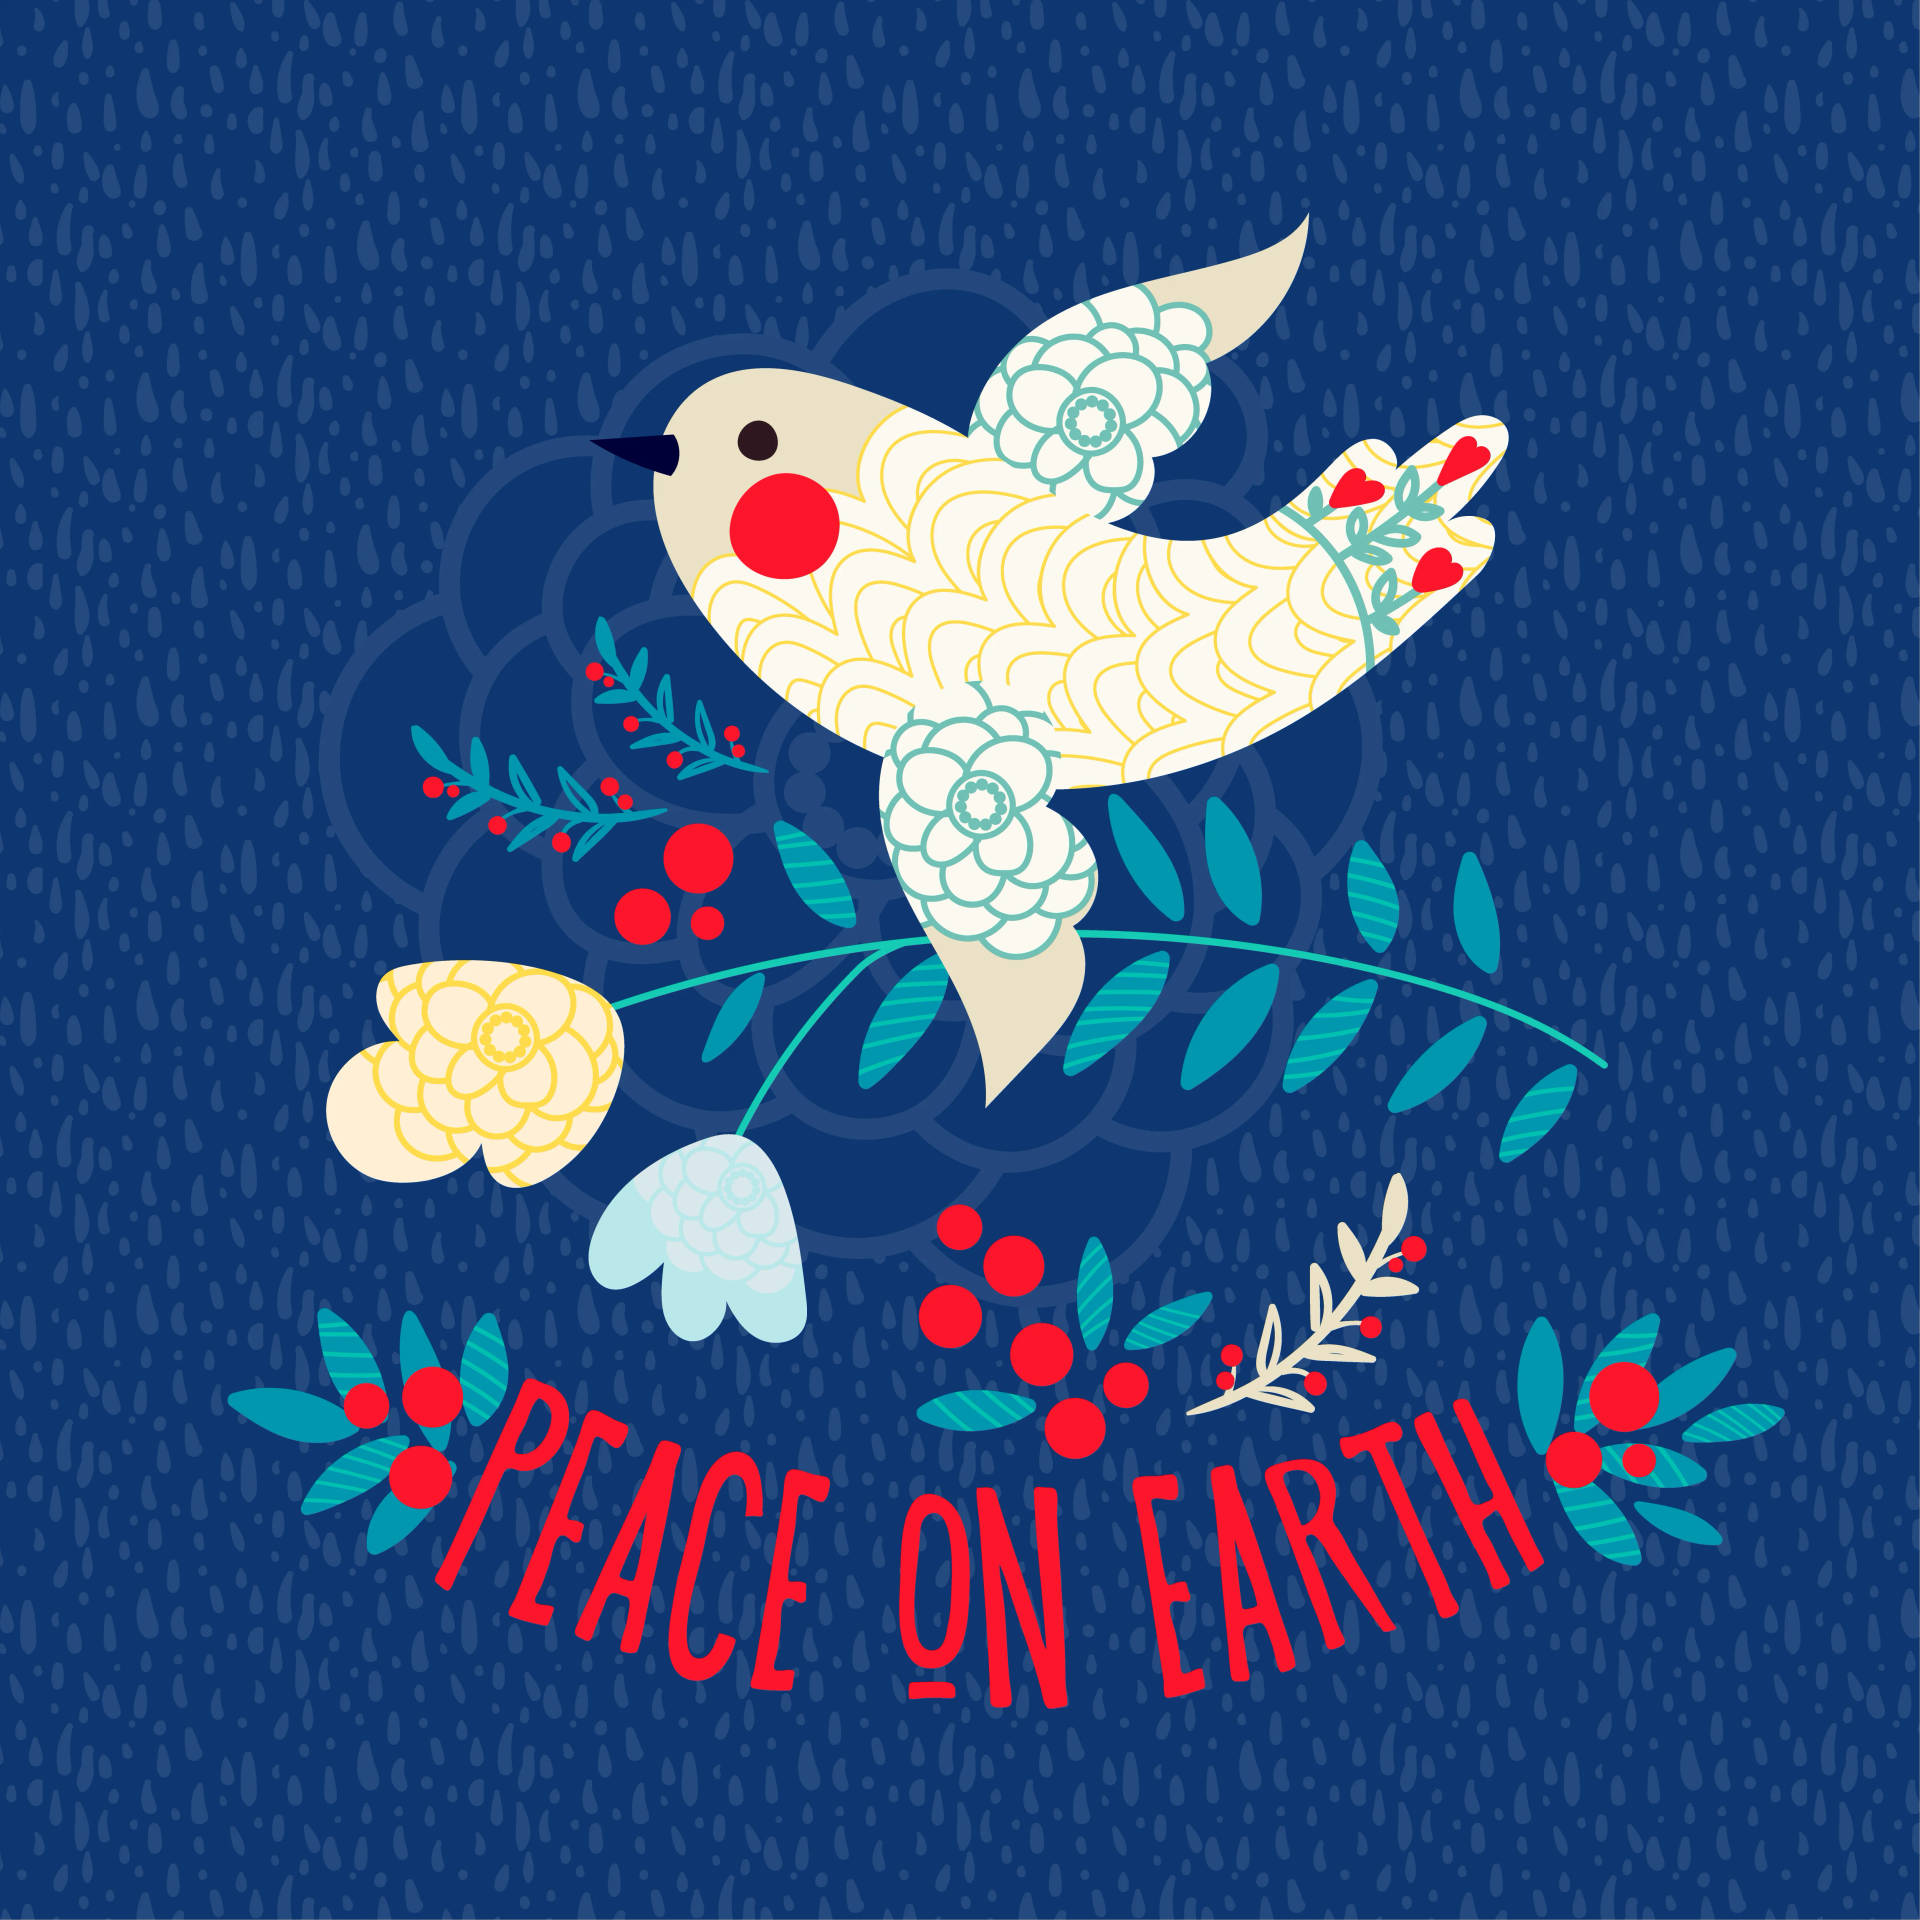 Peace On Earth Art Background